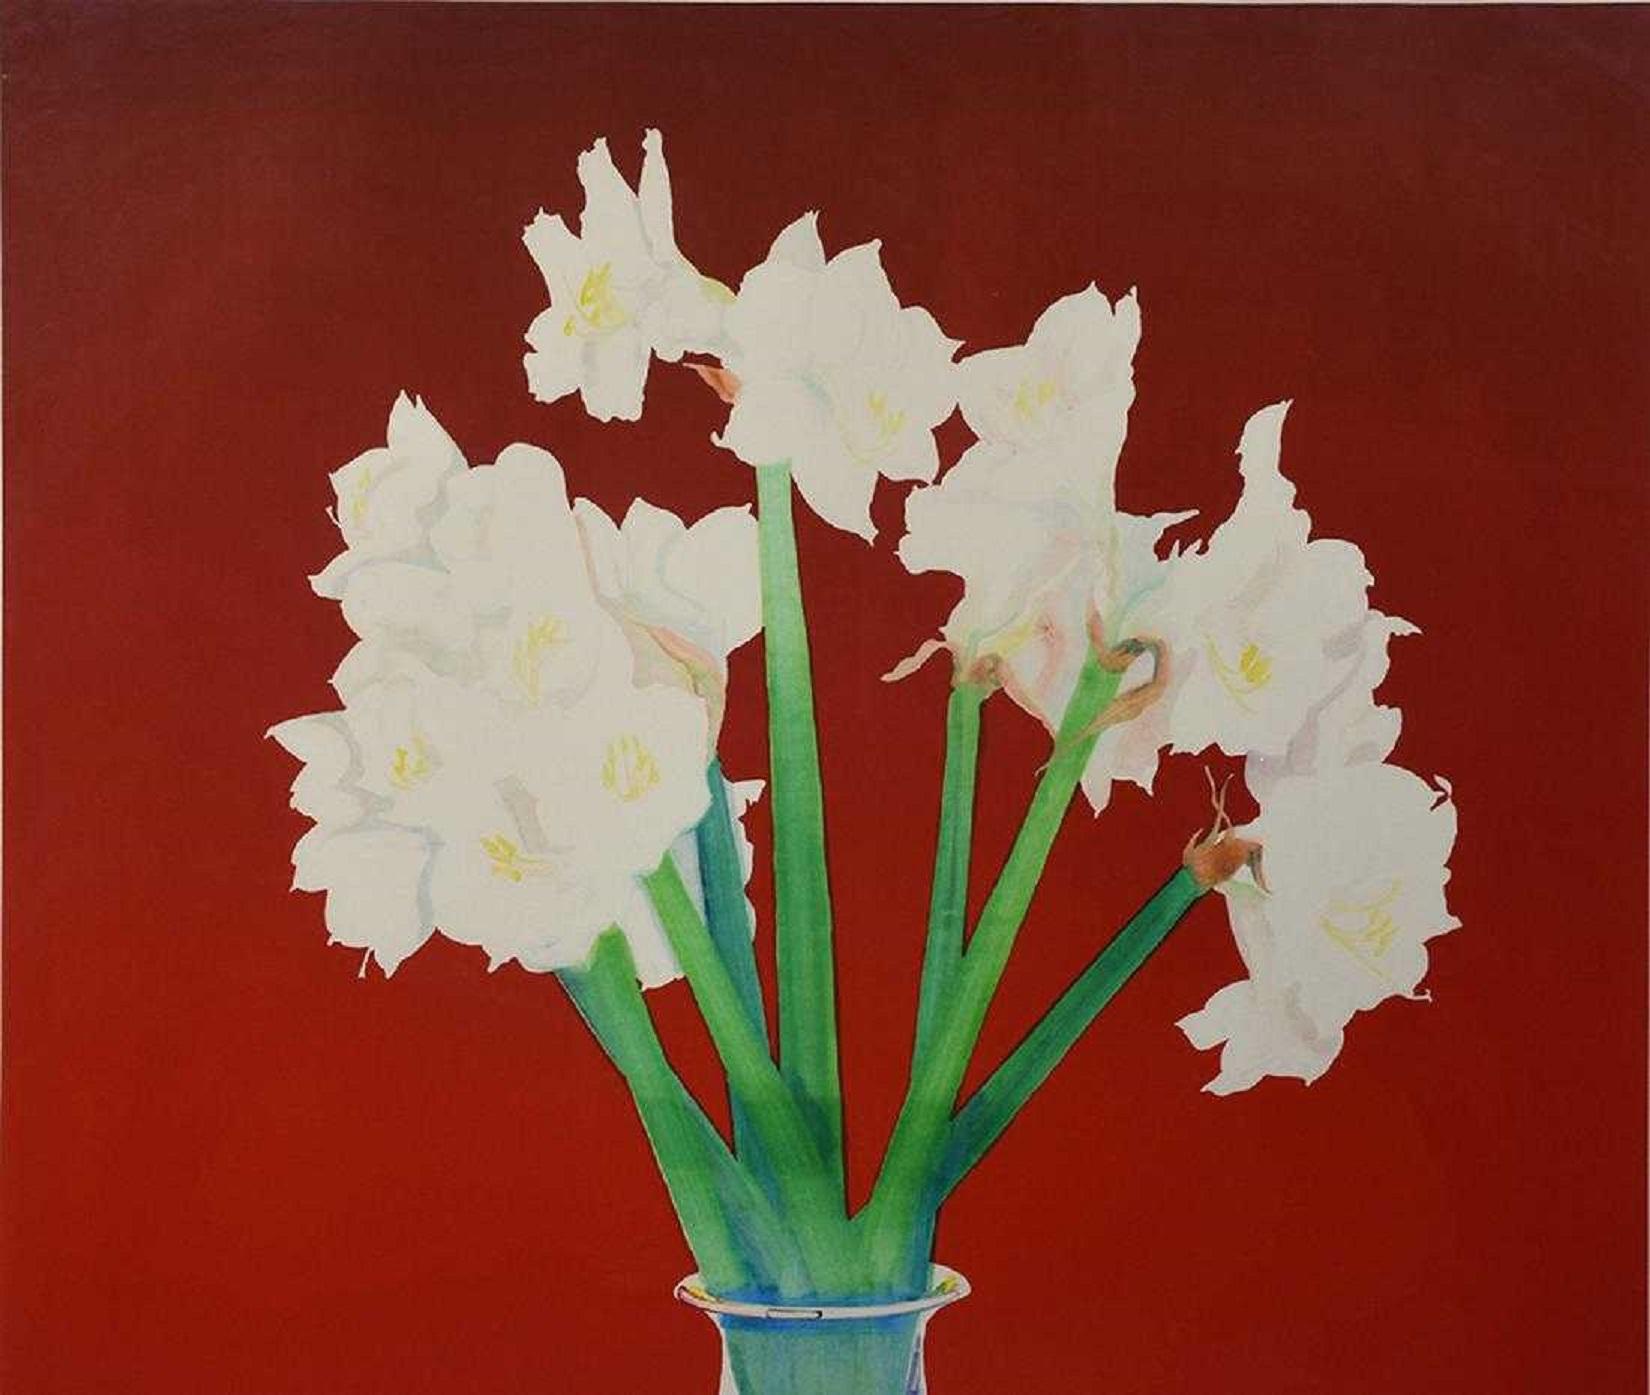 Large Bold Colorful Monoprint Painting Floral in Vase February Amaryllis Flowers 5